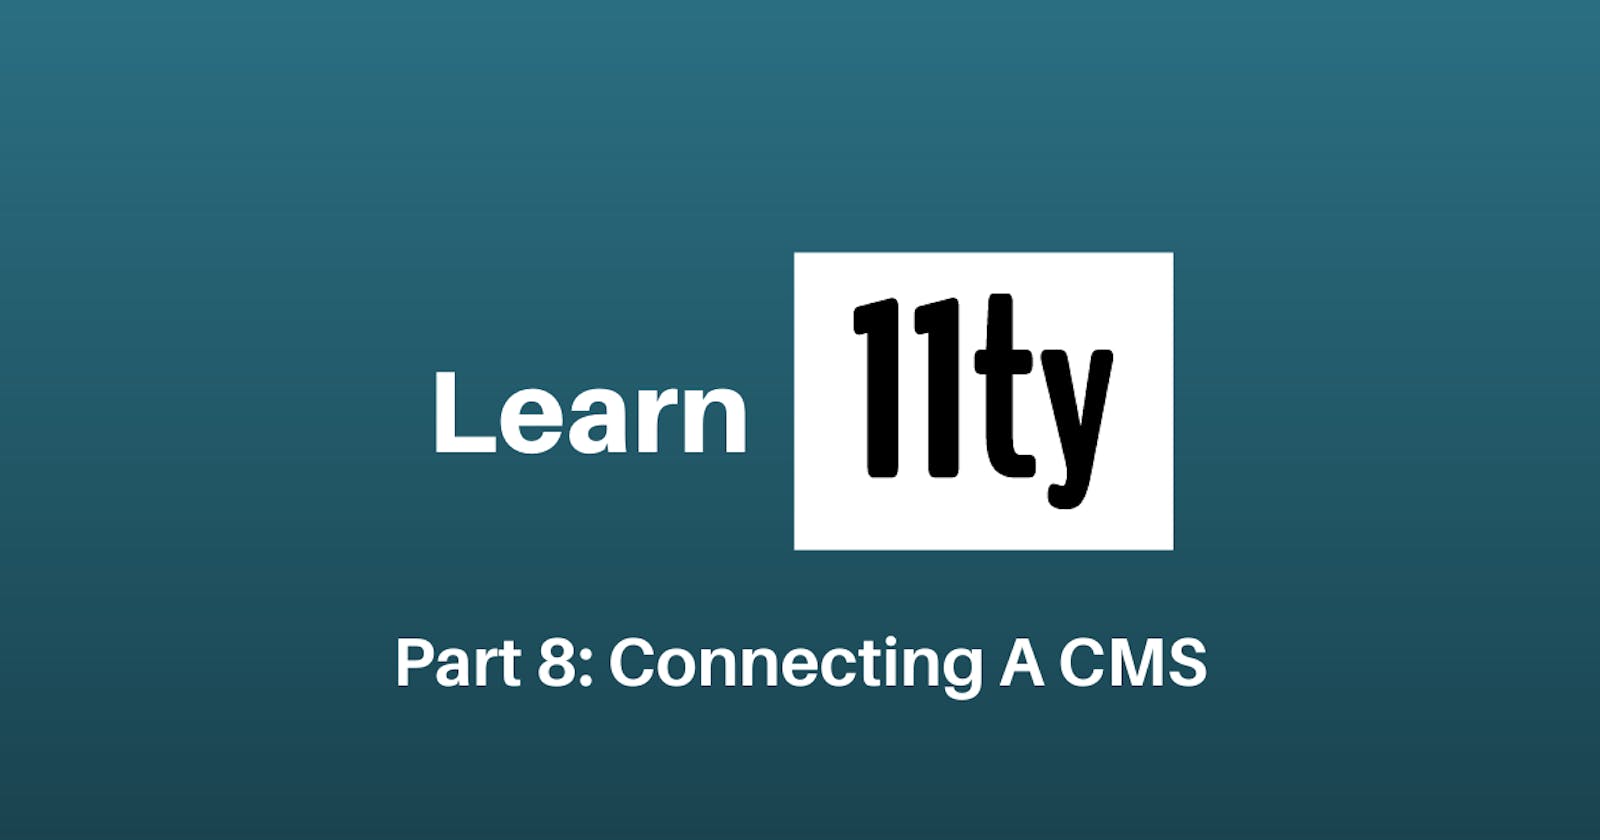 Let's Learn 11ty Part 8: Connecting A CMS